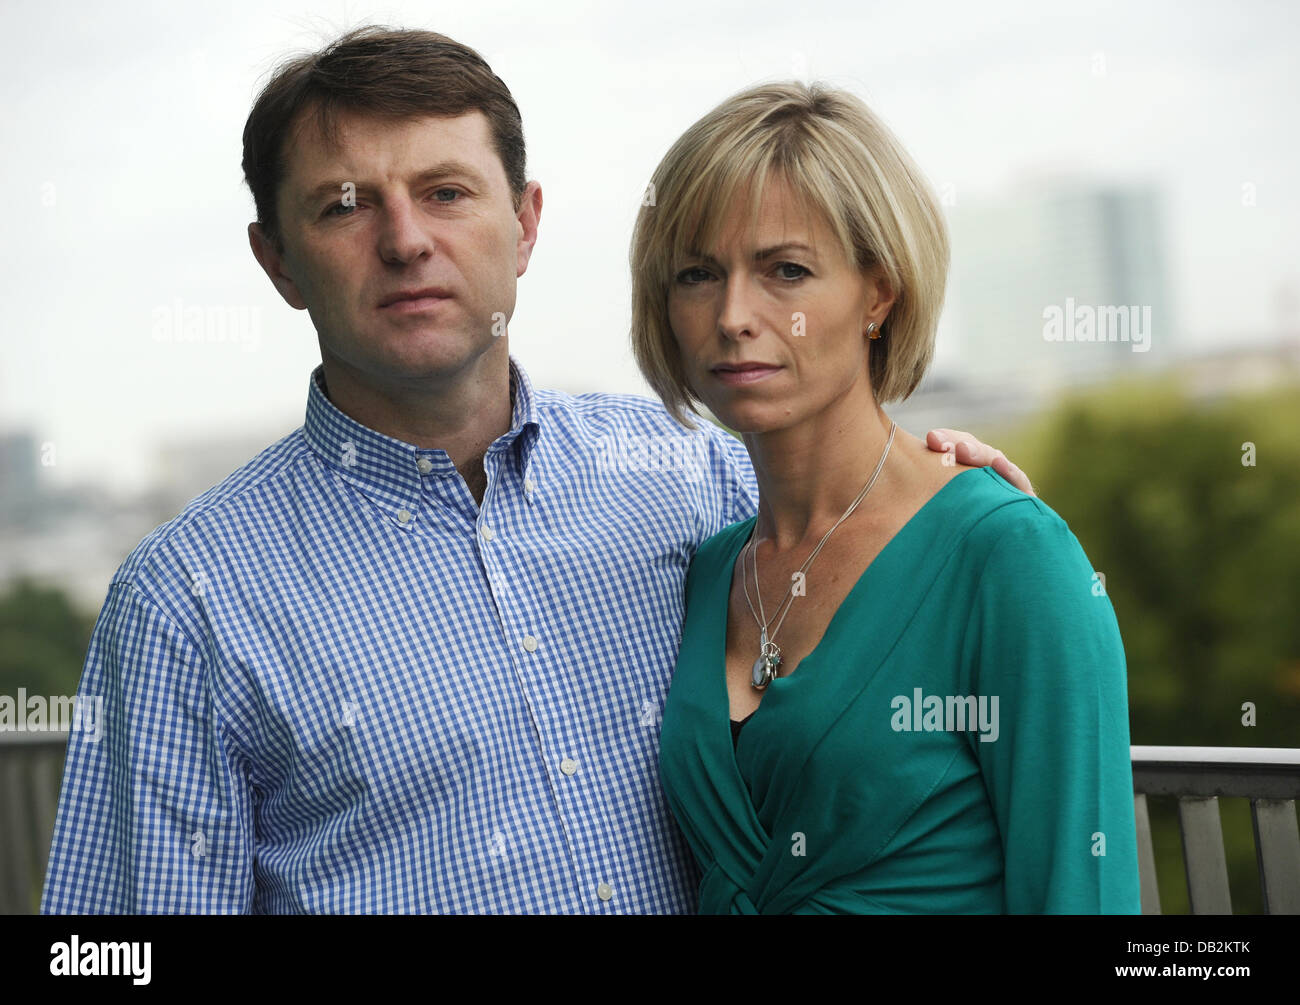 The parents of the missing girk Maddie, Kate and Gerry McCann, present their new book at a hotel in Hamburg, Germany, 16 September 2011. Maddie, Madeleine McCann disappeared four years ago without a trace from the families hotel room. In an extraordinary campaign, the parents tried to find her, but without results. Now they speak about their time of suffering, their hopes and throw Stock Photo